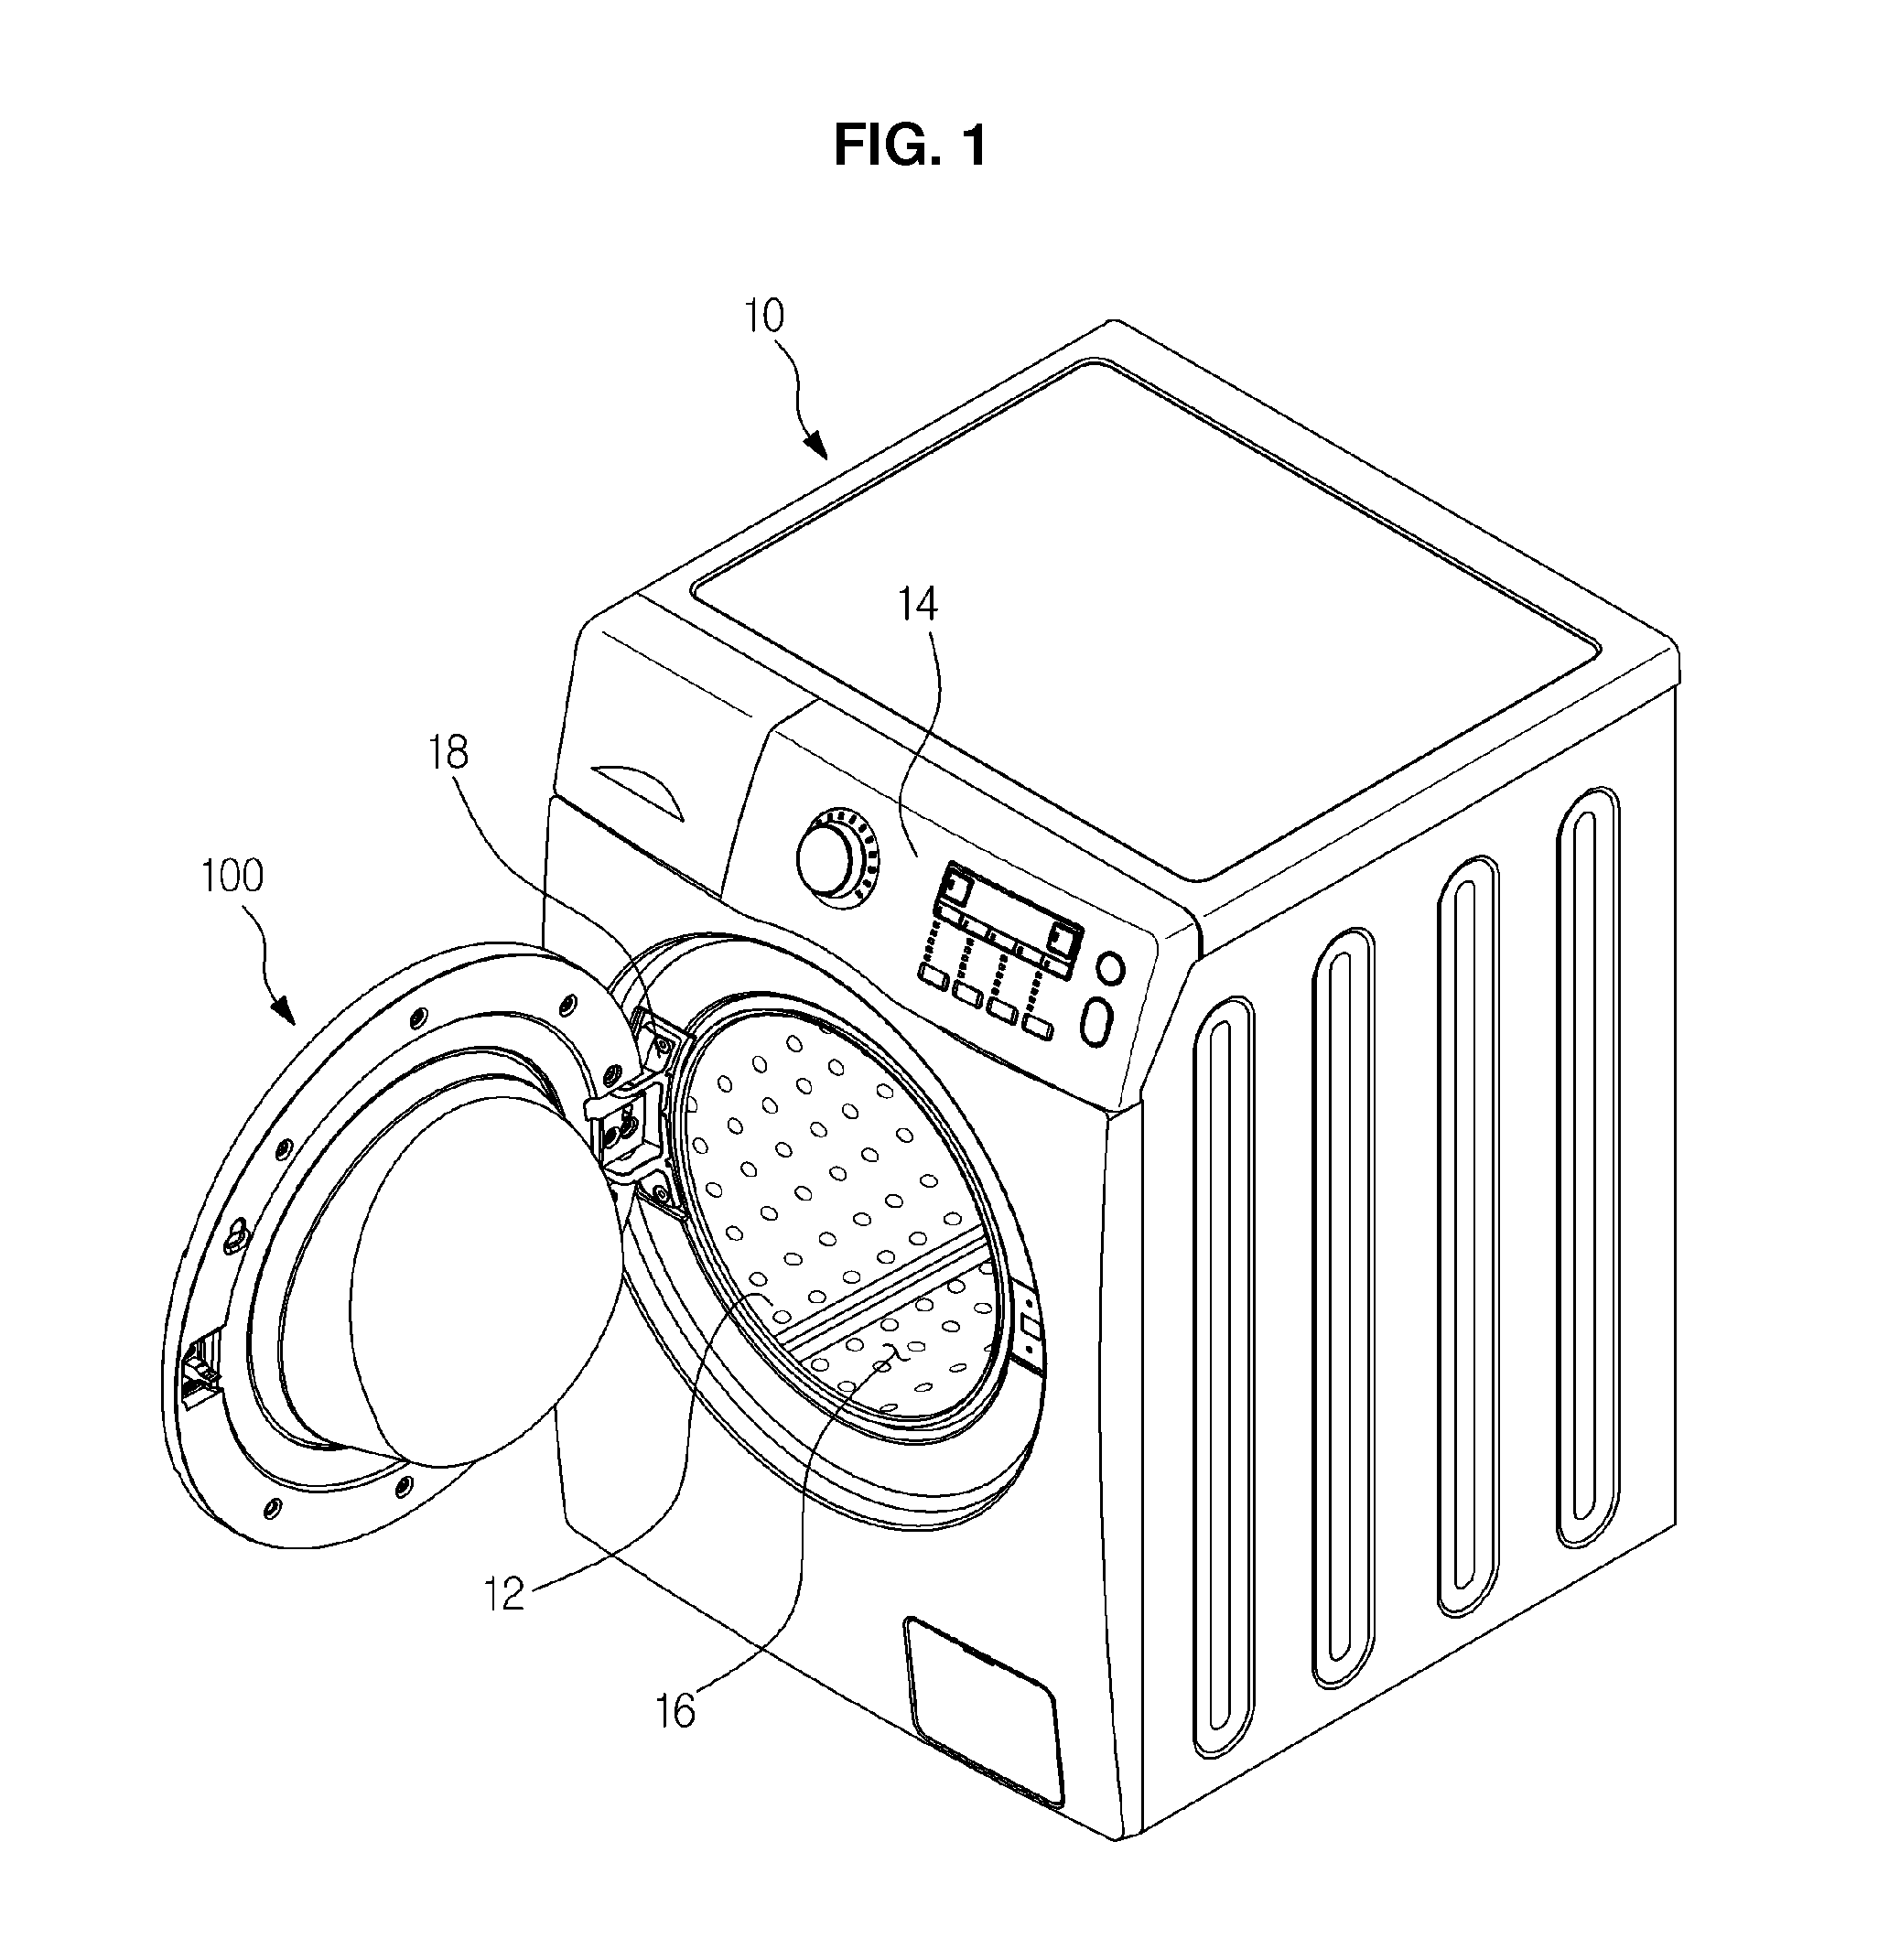 Door and clothes treating apparatus having the same